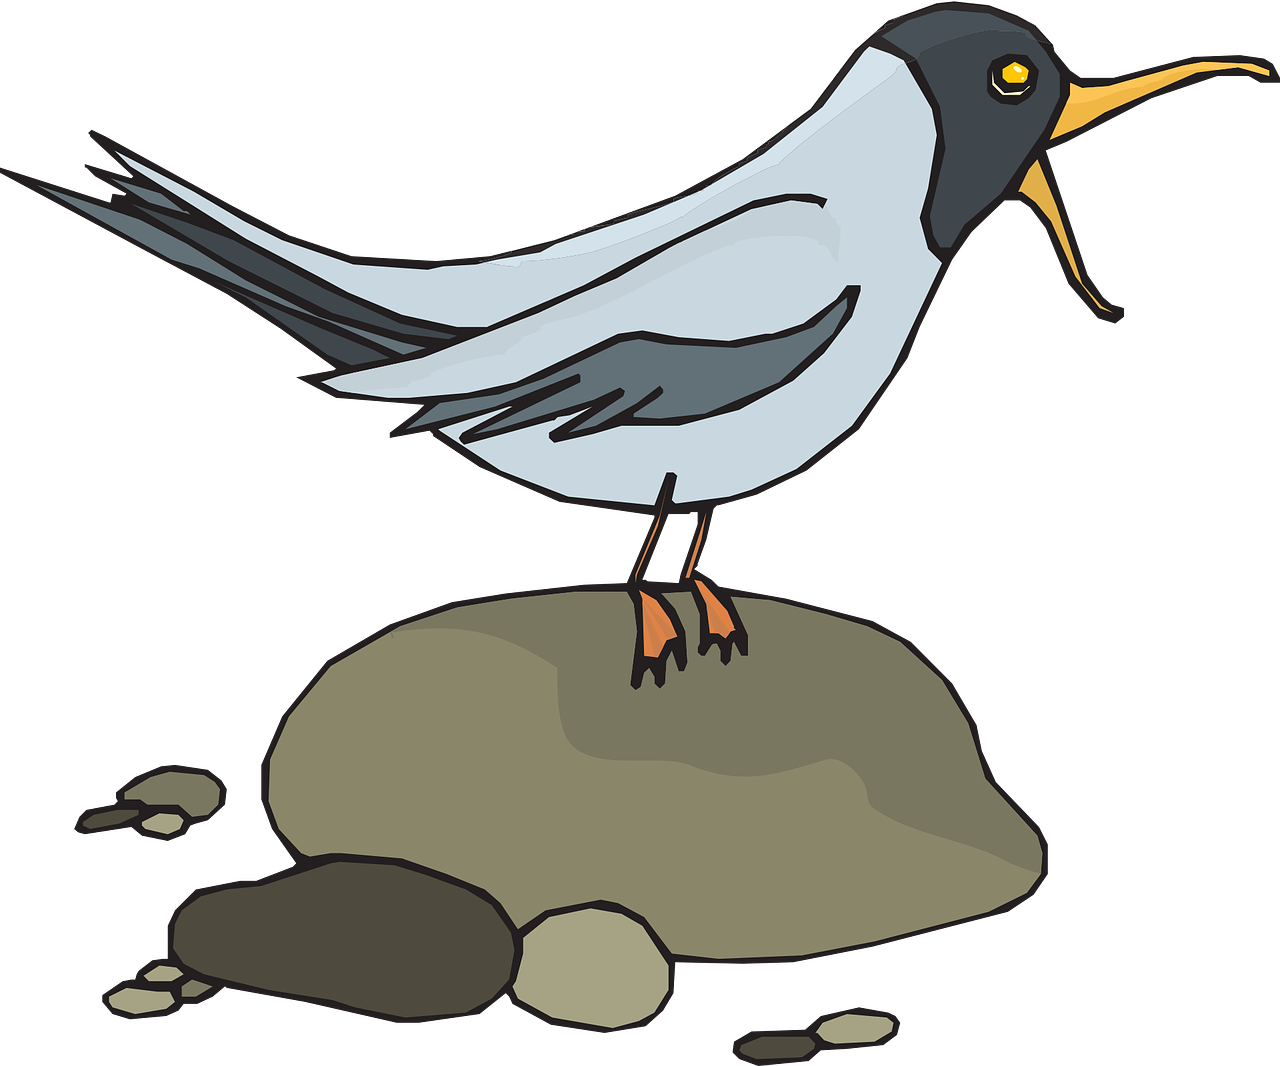 a black and white bird standing on a rock, an illustration of, full color illustration, wikihow illustration, on black background, cartoon style illustration